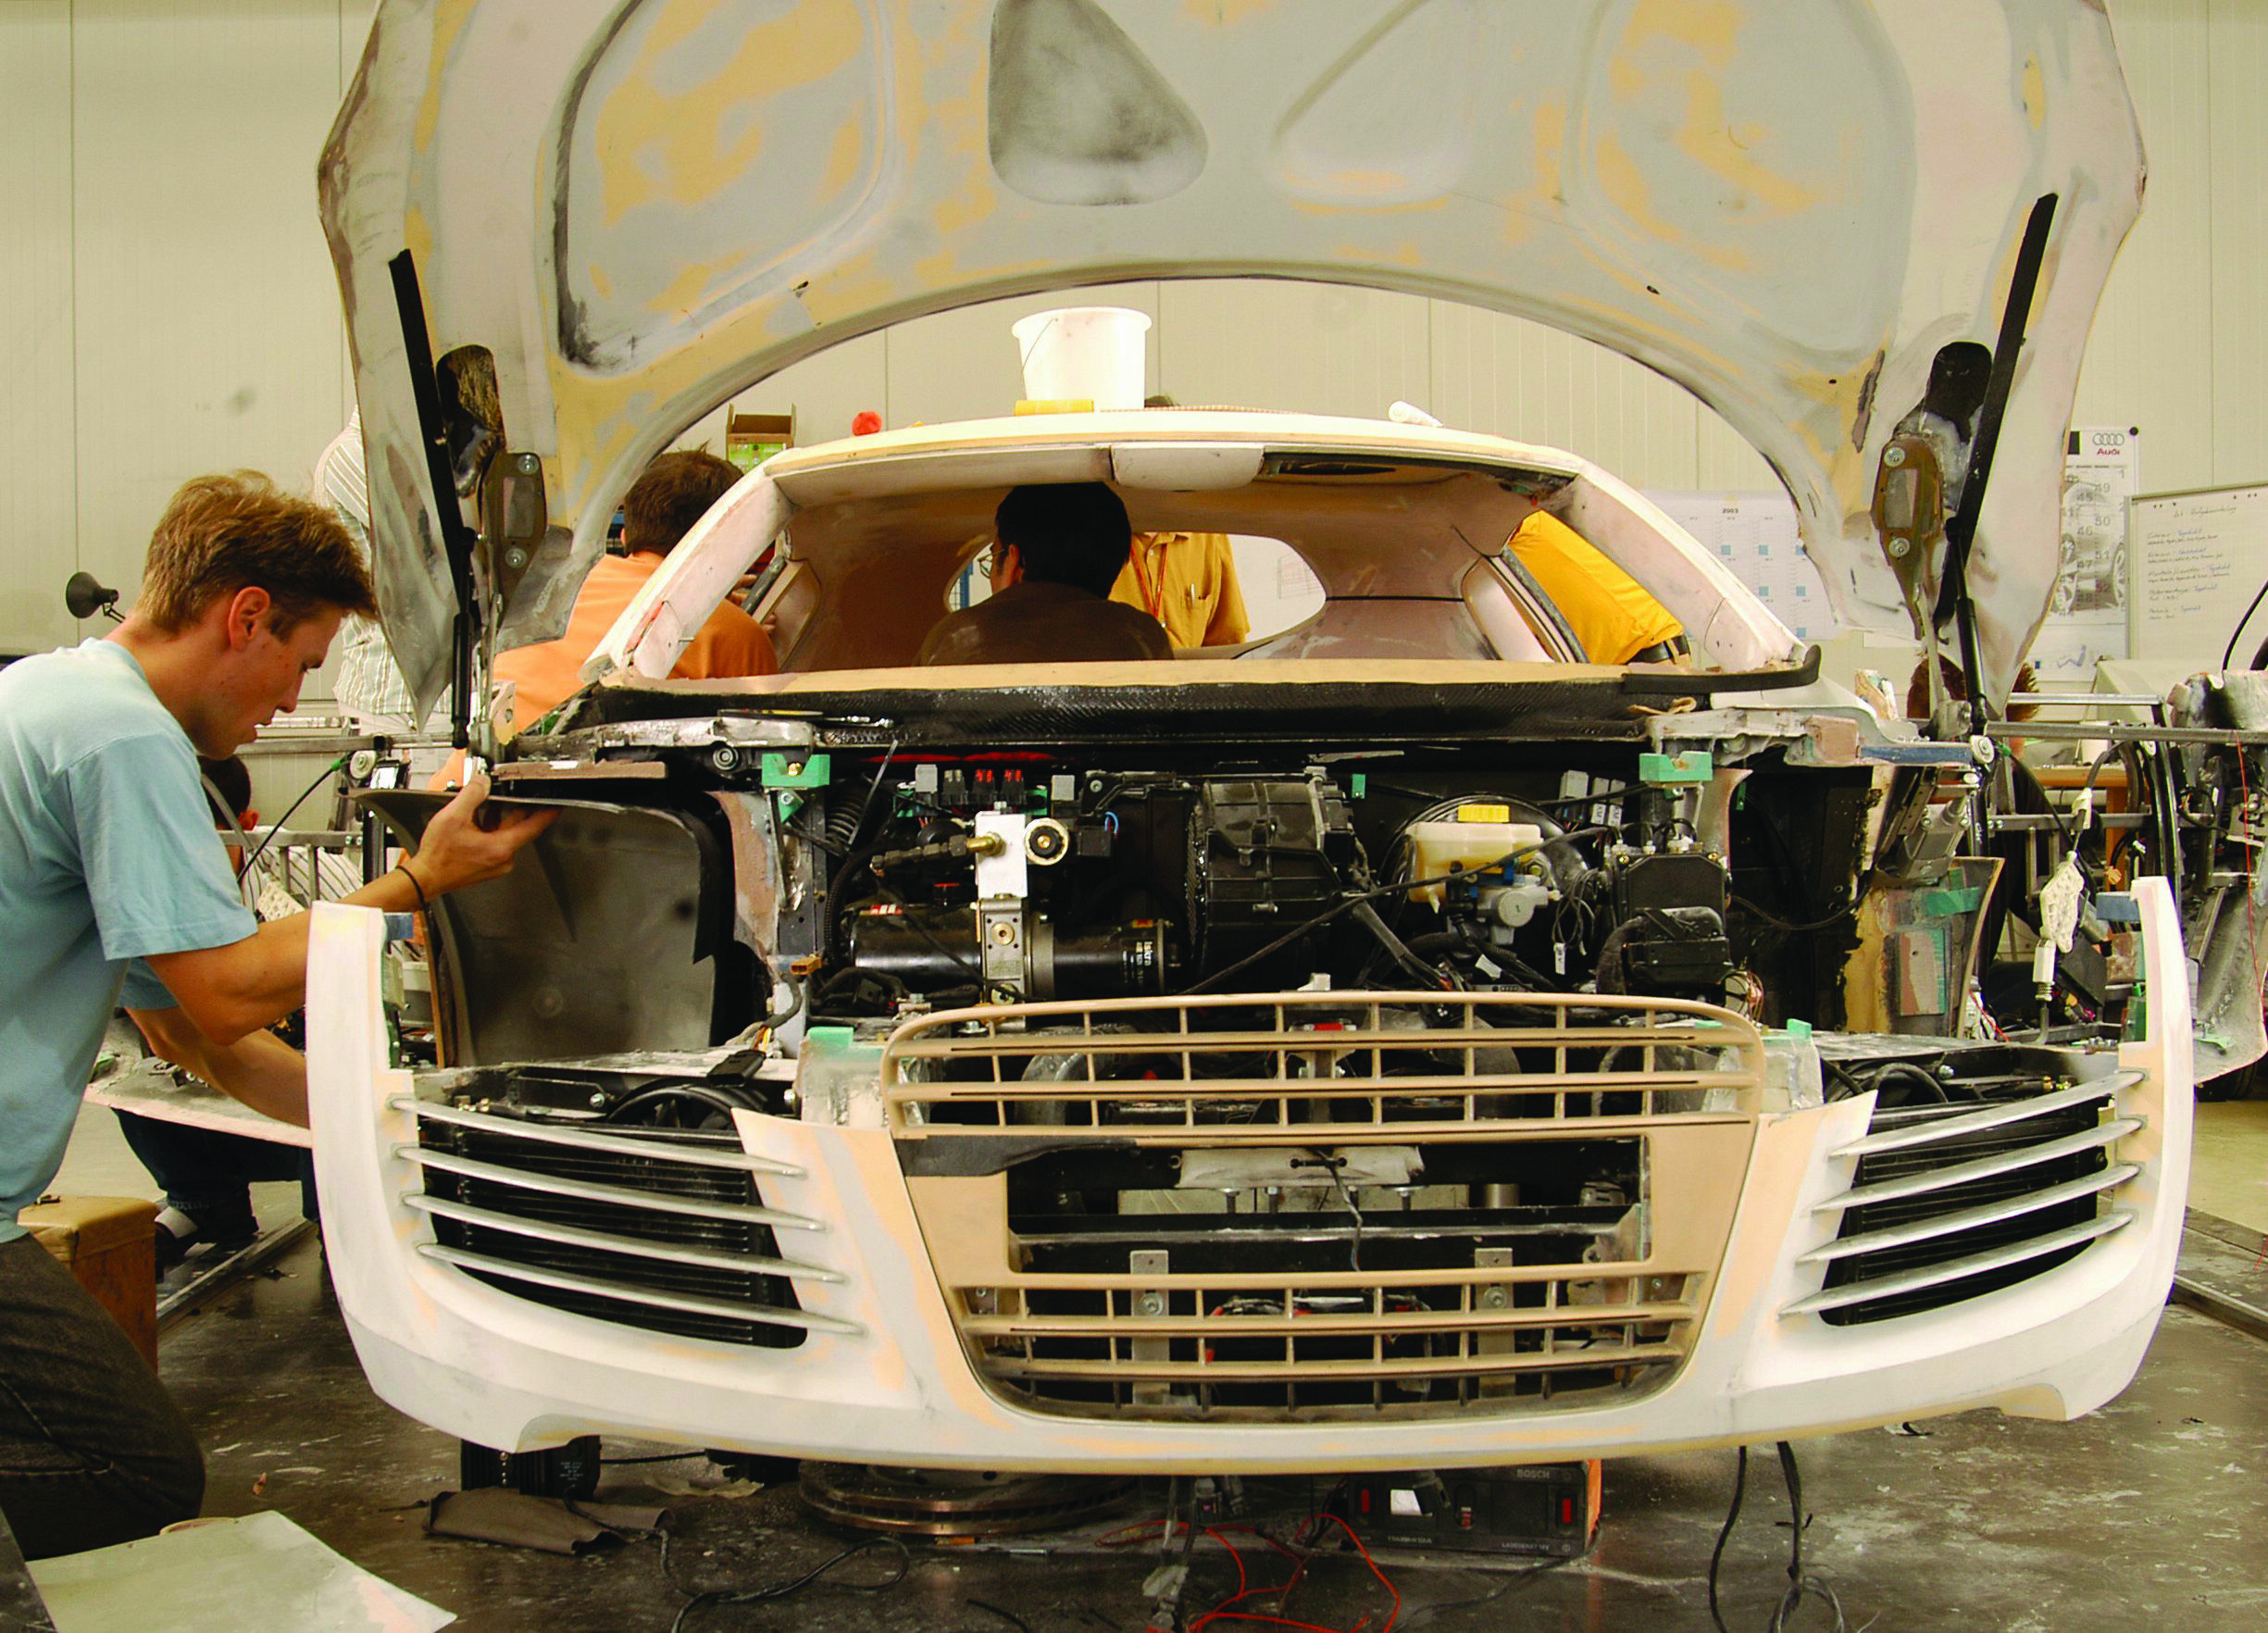 Making of the Audi Le Mans quattro: A glance at the inner workings of the sports car study